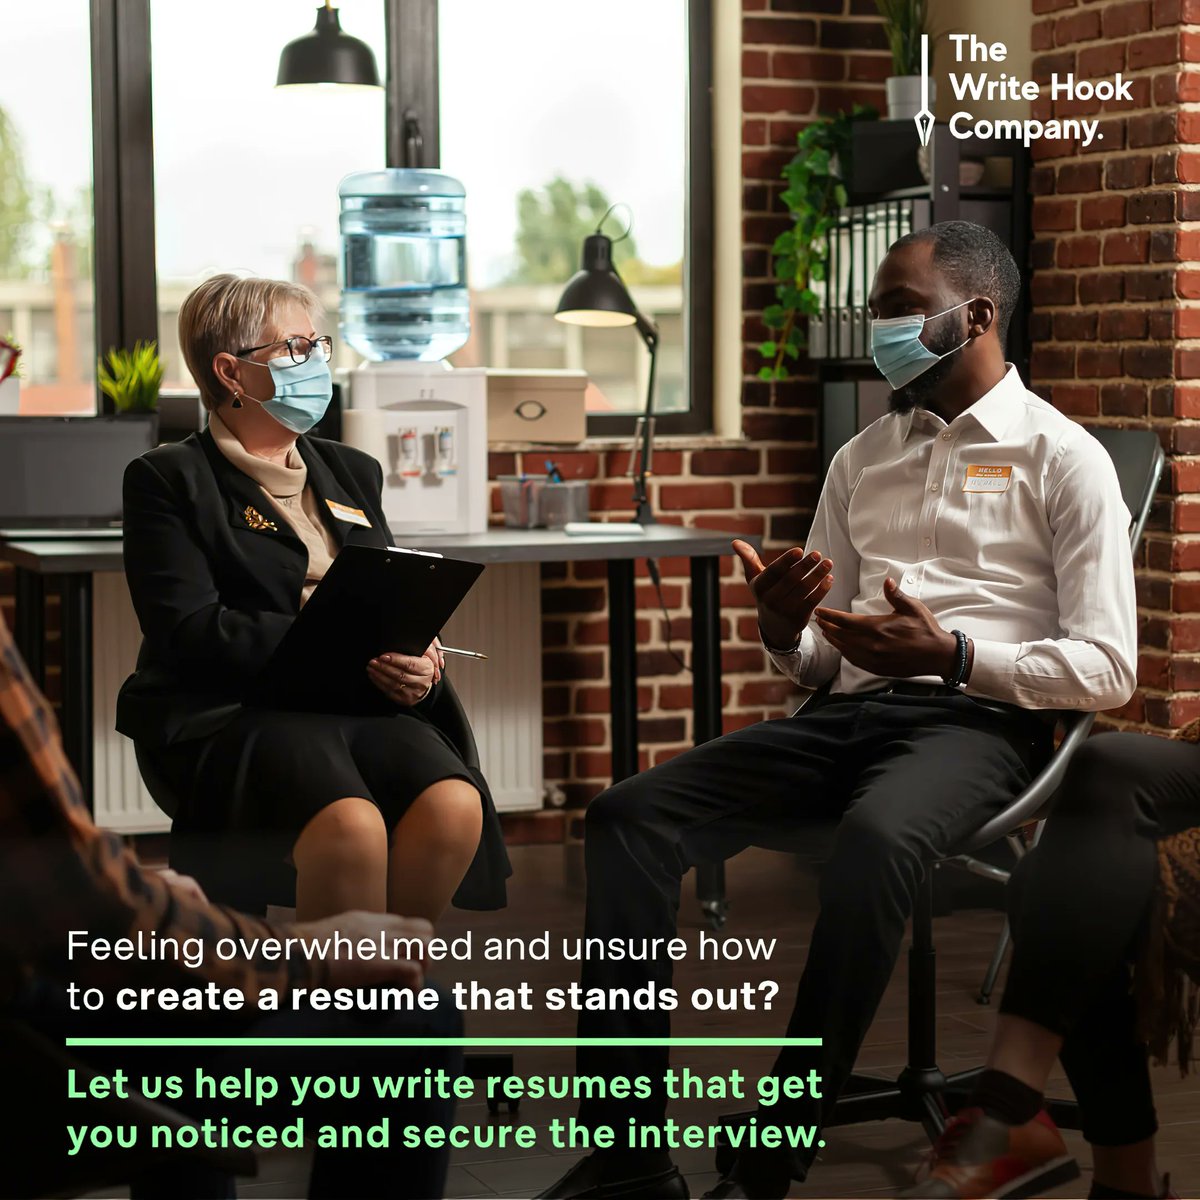 Tired of applying for jobs and never hearing back? Let us help you create a resume that showcases your skills and experience in the best possible light and gets you noticed by potential employers. #resumewriting #writingservices #jobapplication Image by DCStudio on freepik